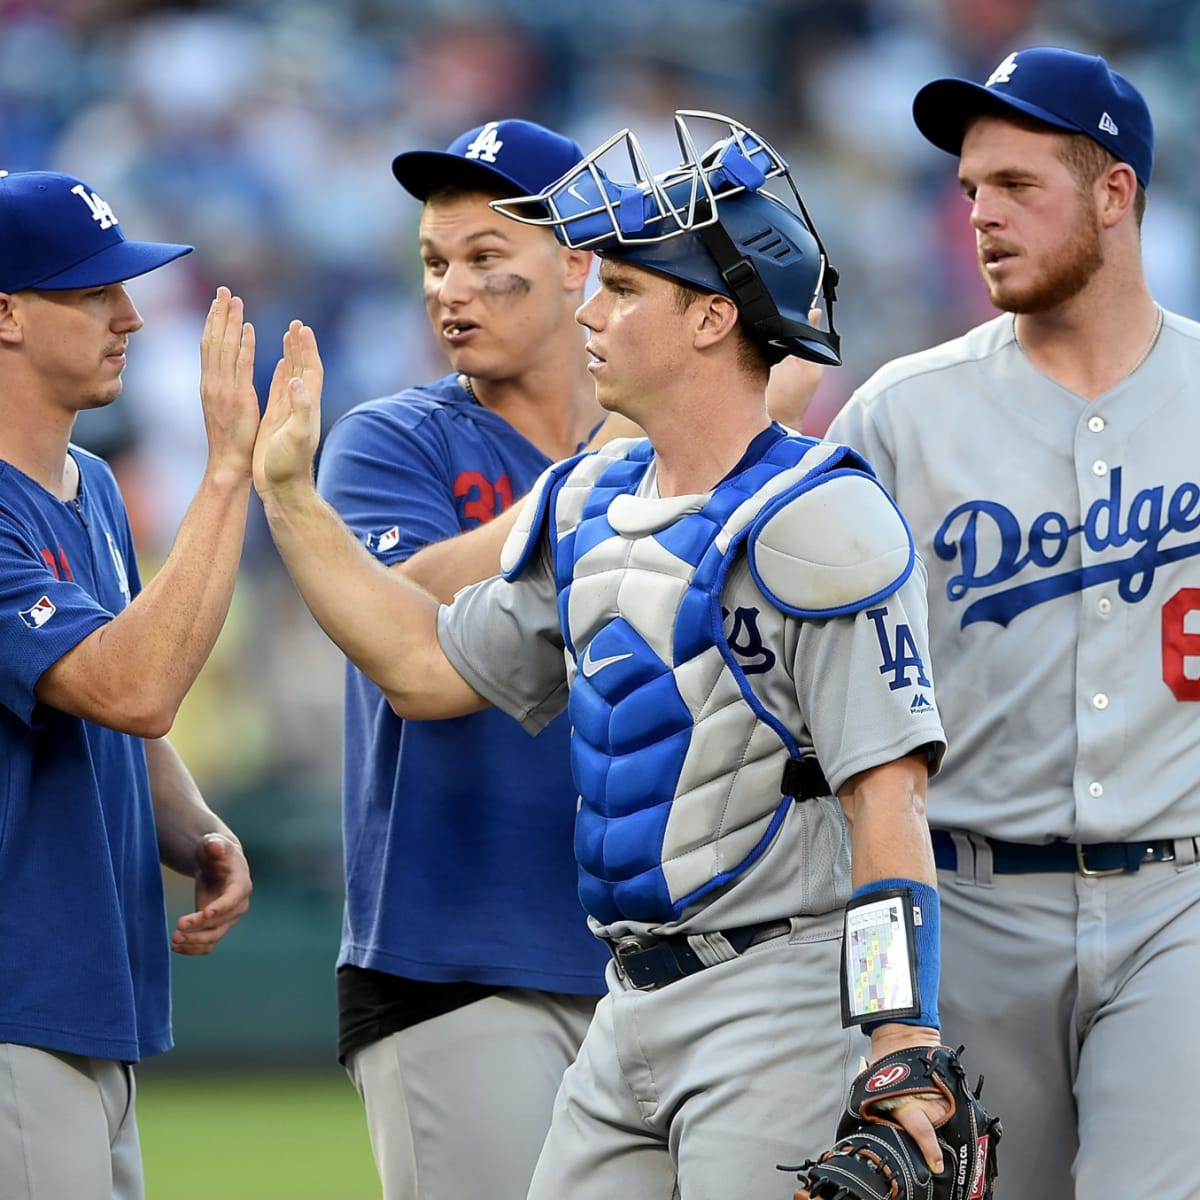 Dodgers place Joc Pederson on DL with groin injury – Daily News